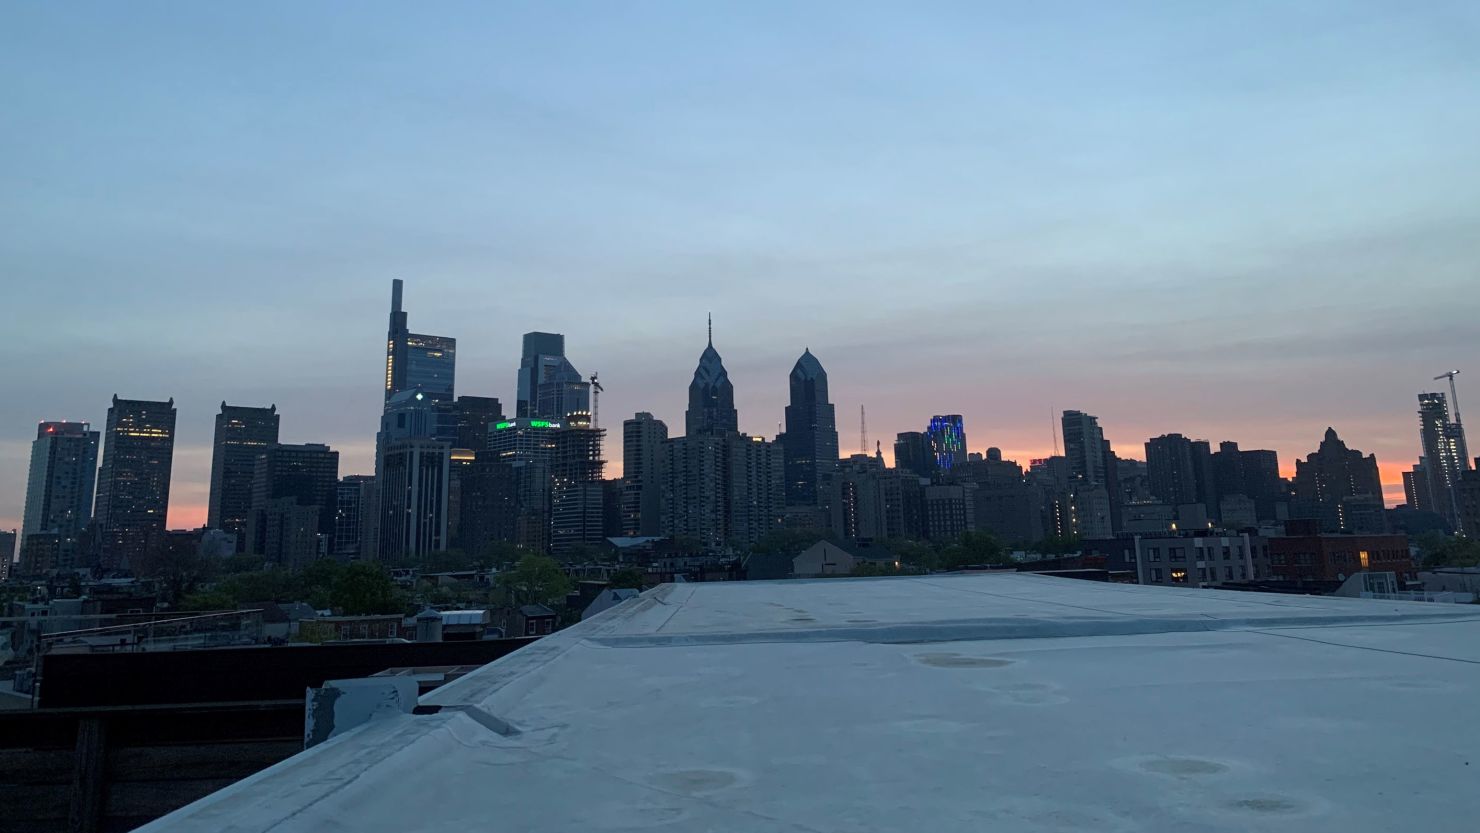 Philadelphia's skyline with the lights off (midnight to 6 a.m.) in April 2021.